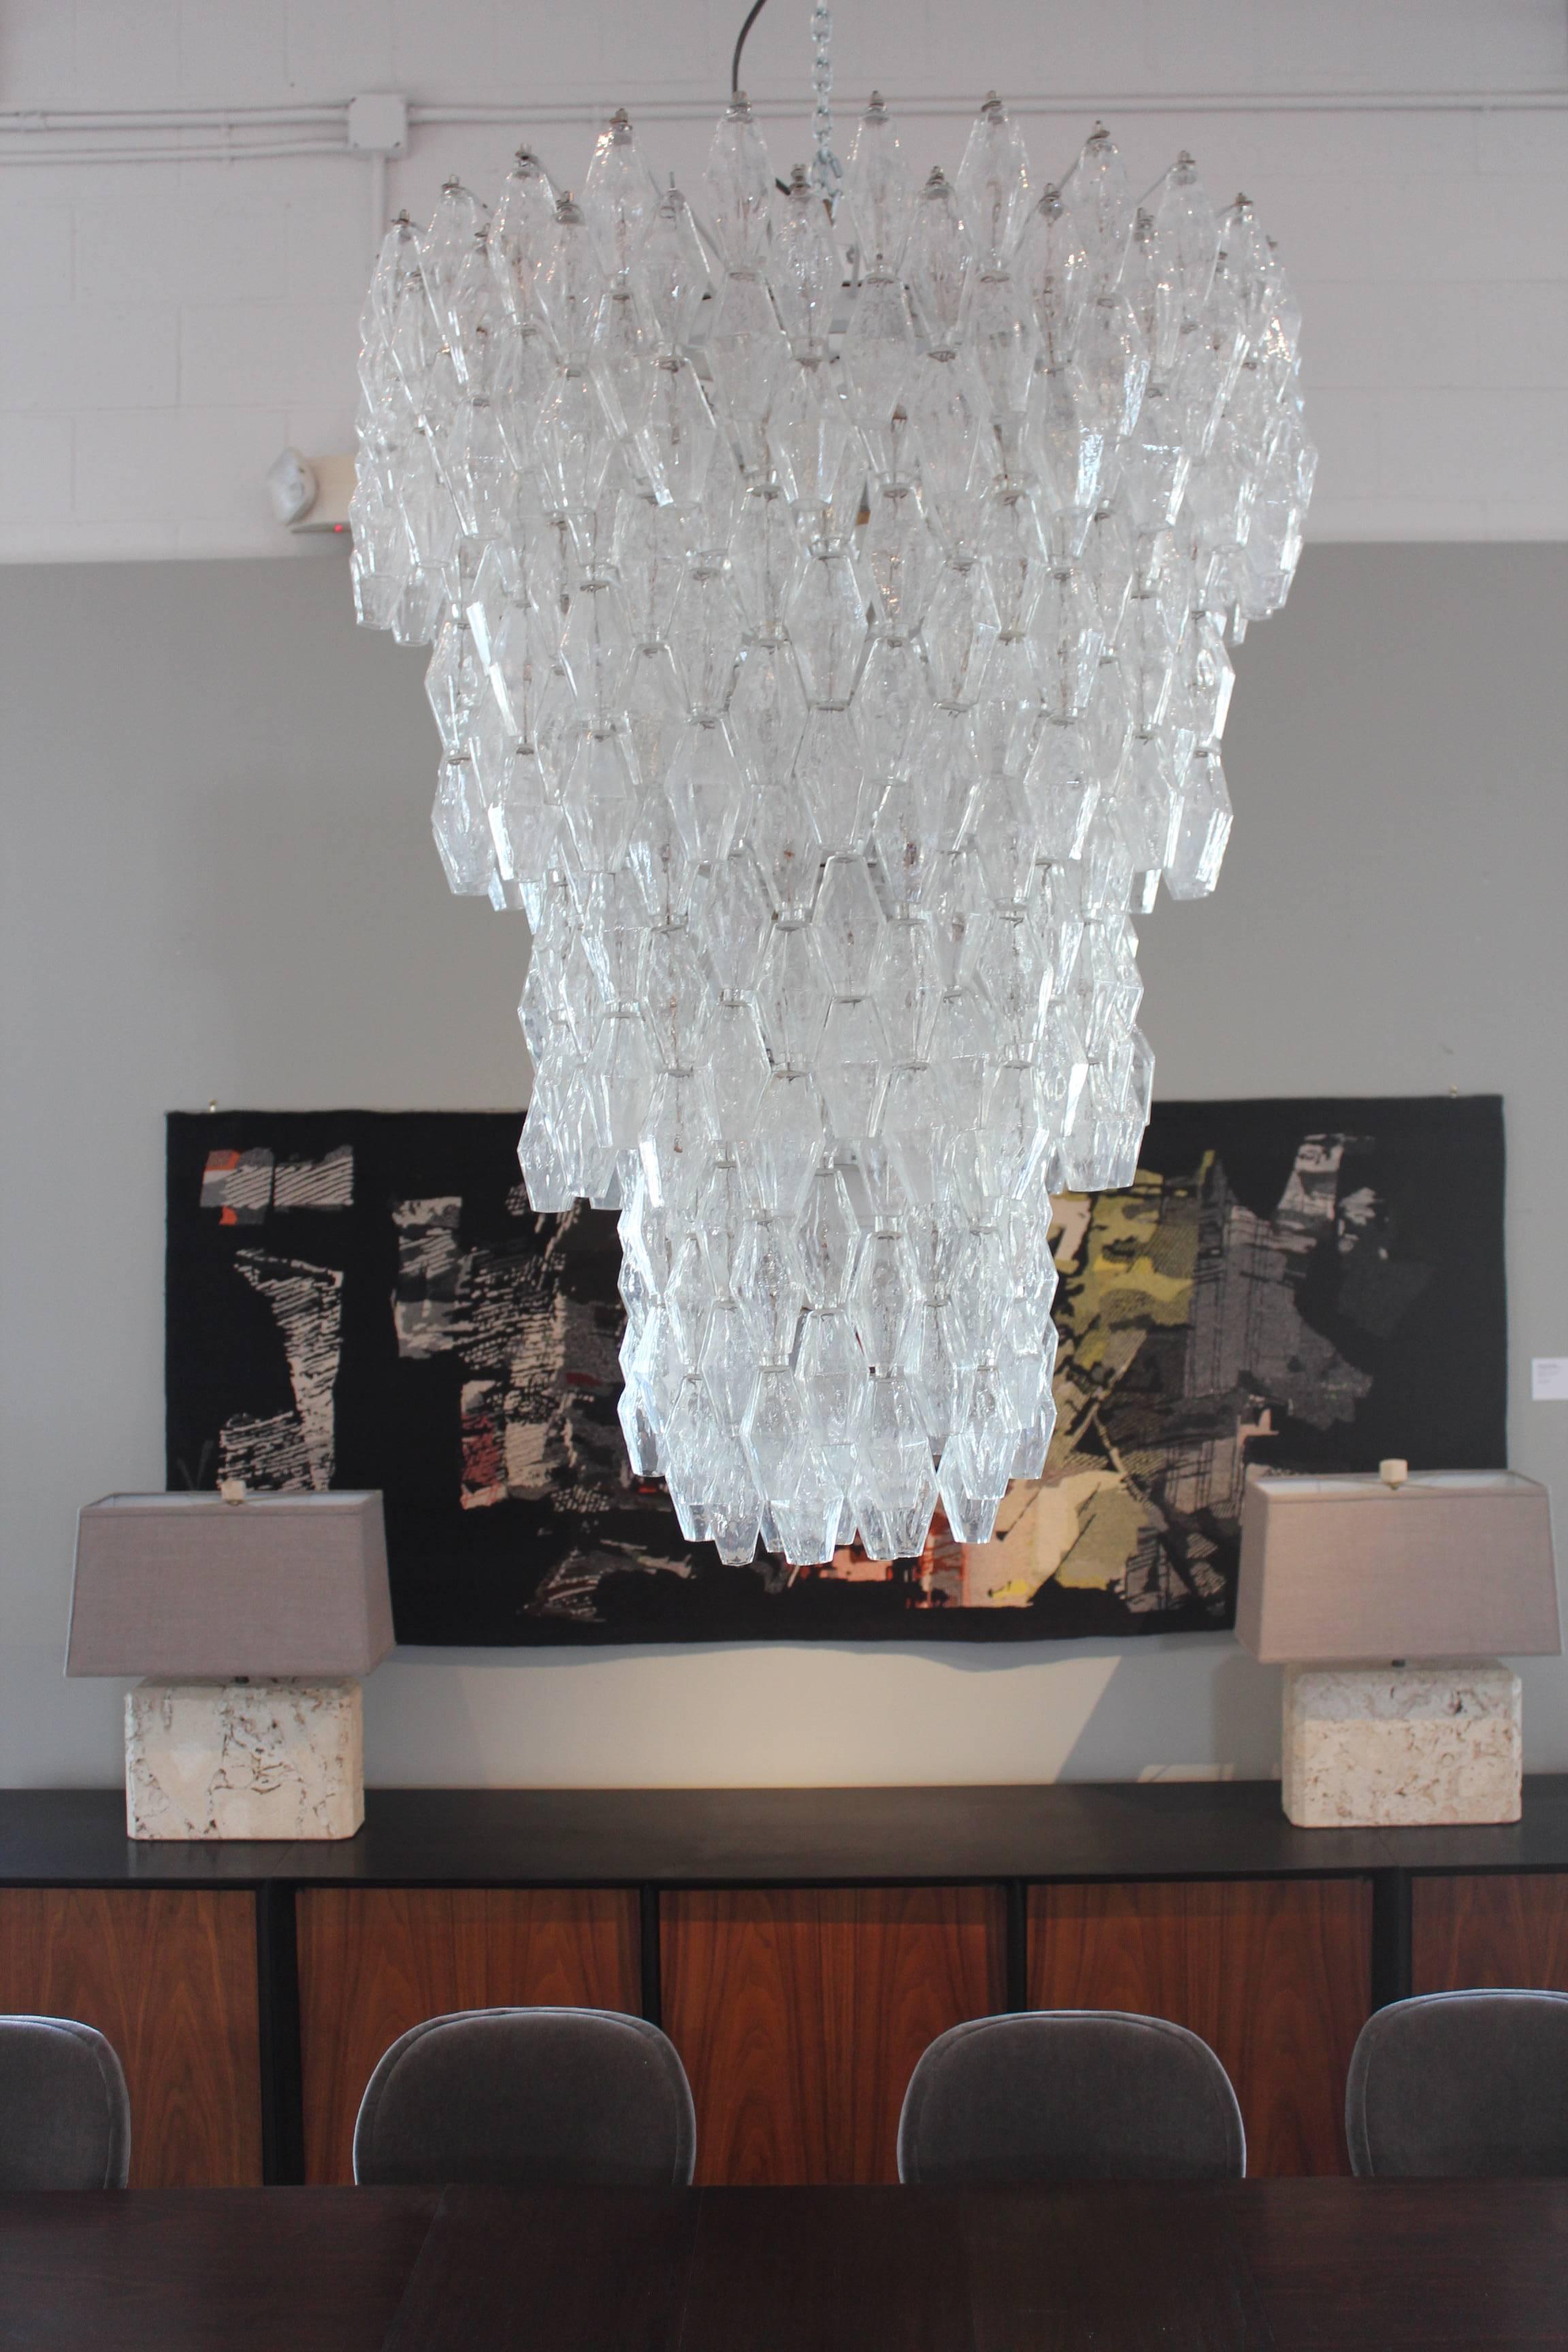 A large polyhedral glass chandelier designed by Carlo Scarpa for Venini.